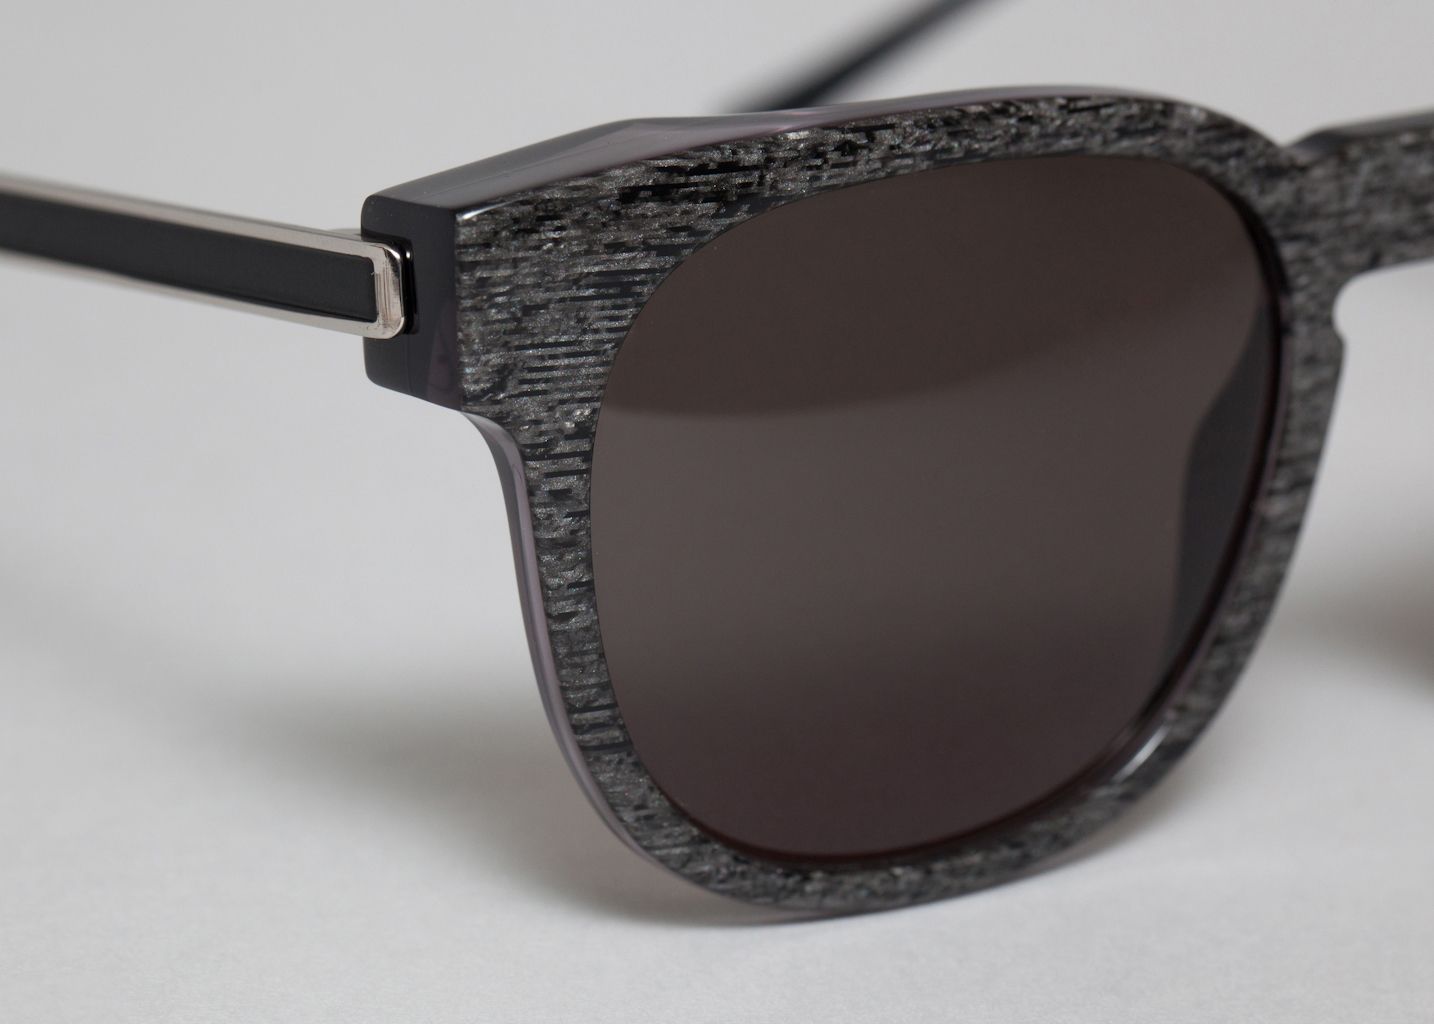 Authority Sunglasses - Thierry Lasry